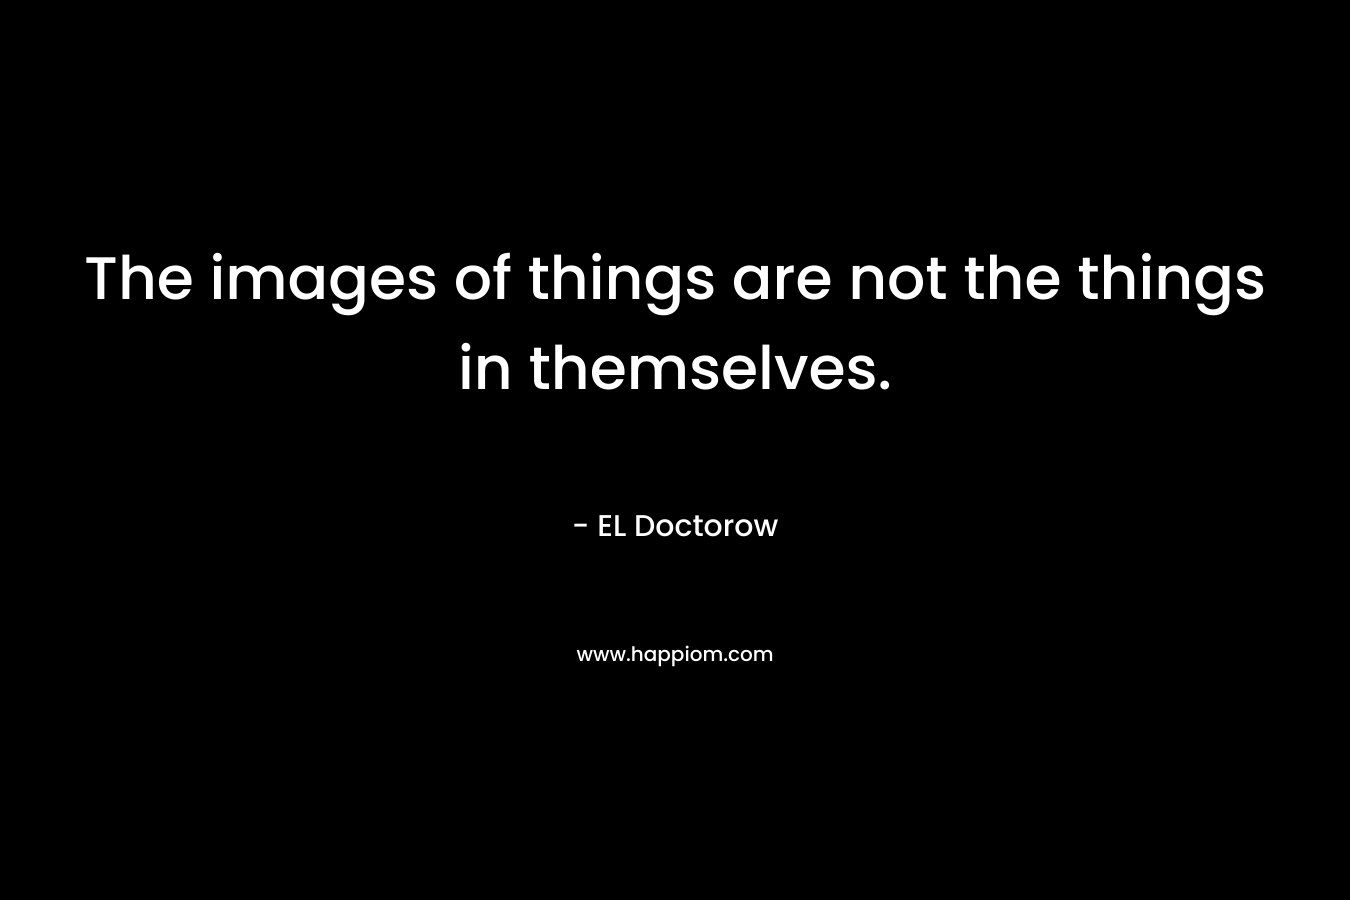 The images of things are not the things in themselves.